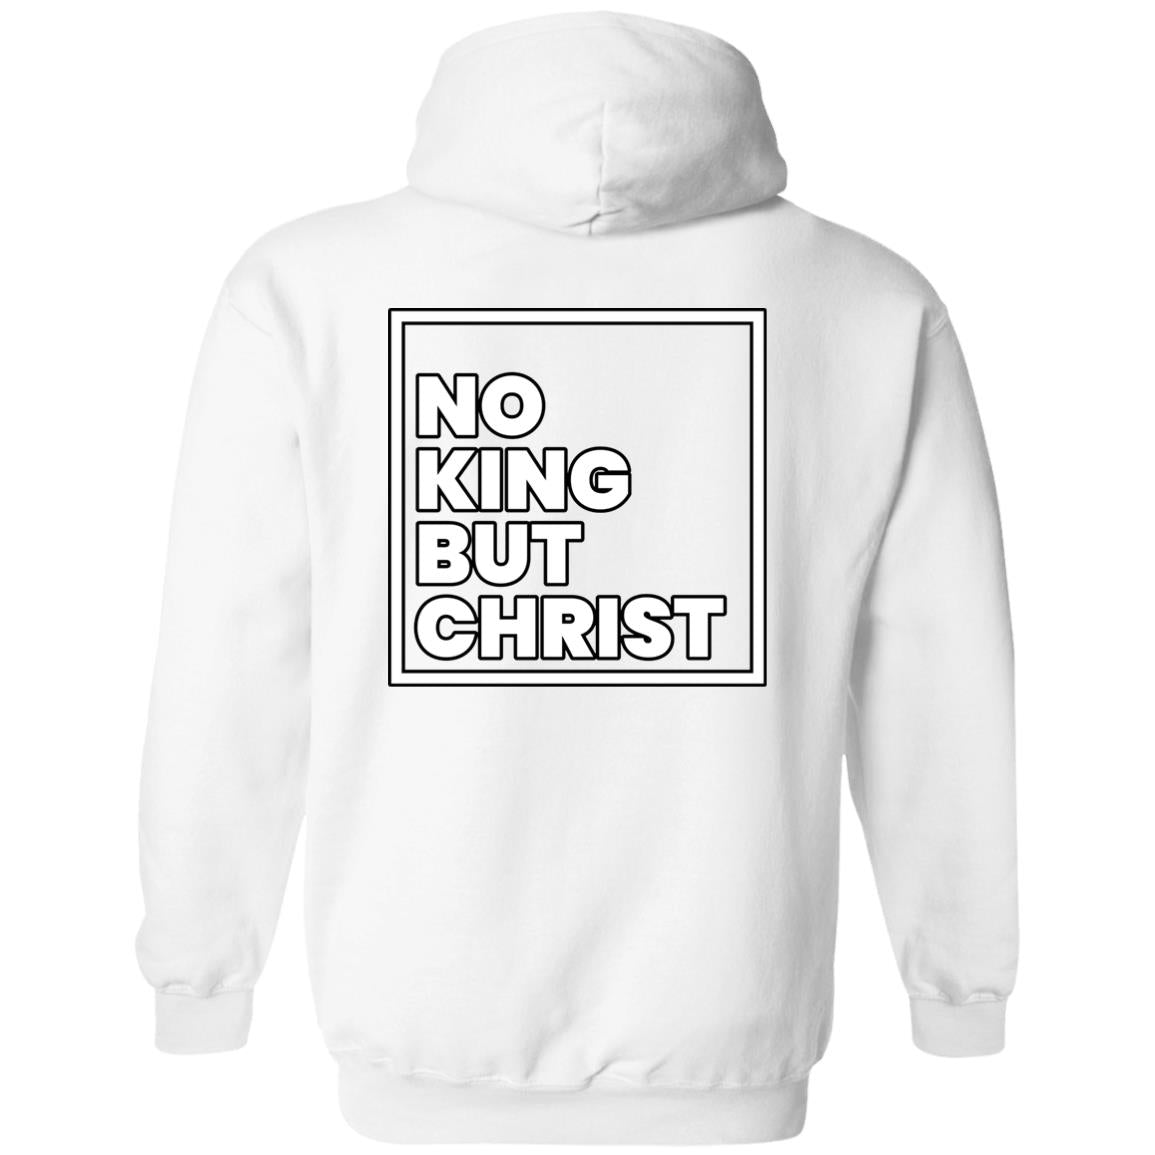 No King But Christ (Unisex Hoodie)